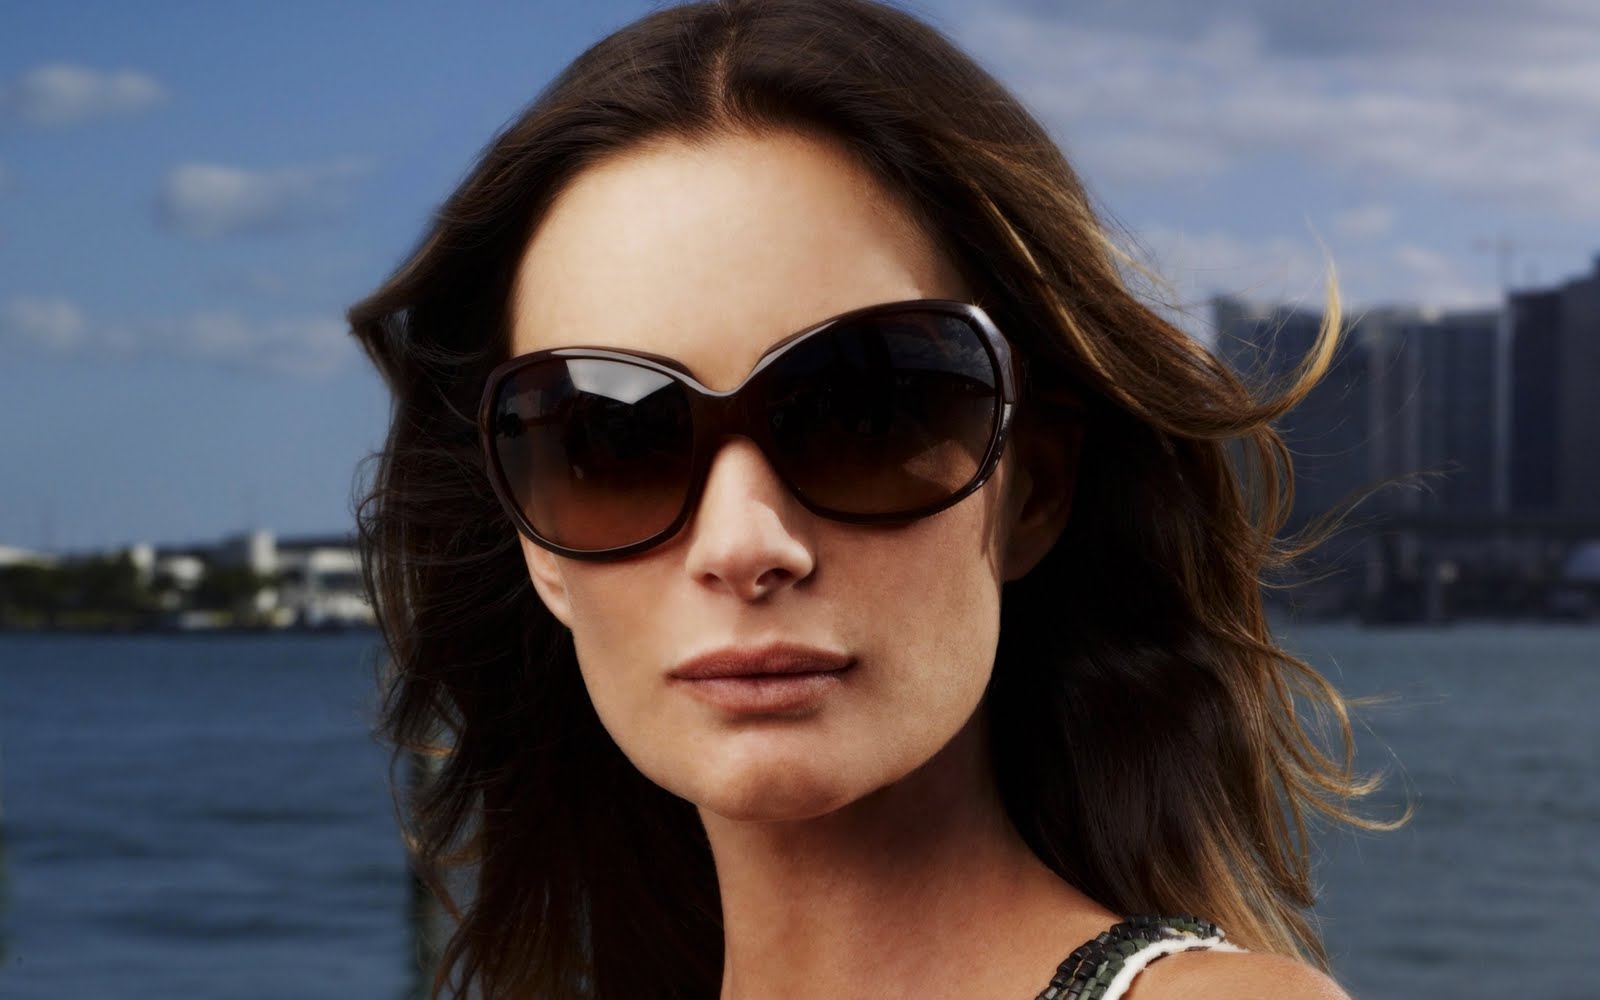 Gabrielle Anwar Biography and Photos - Girls Idols Wallpapers and Biography